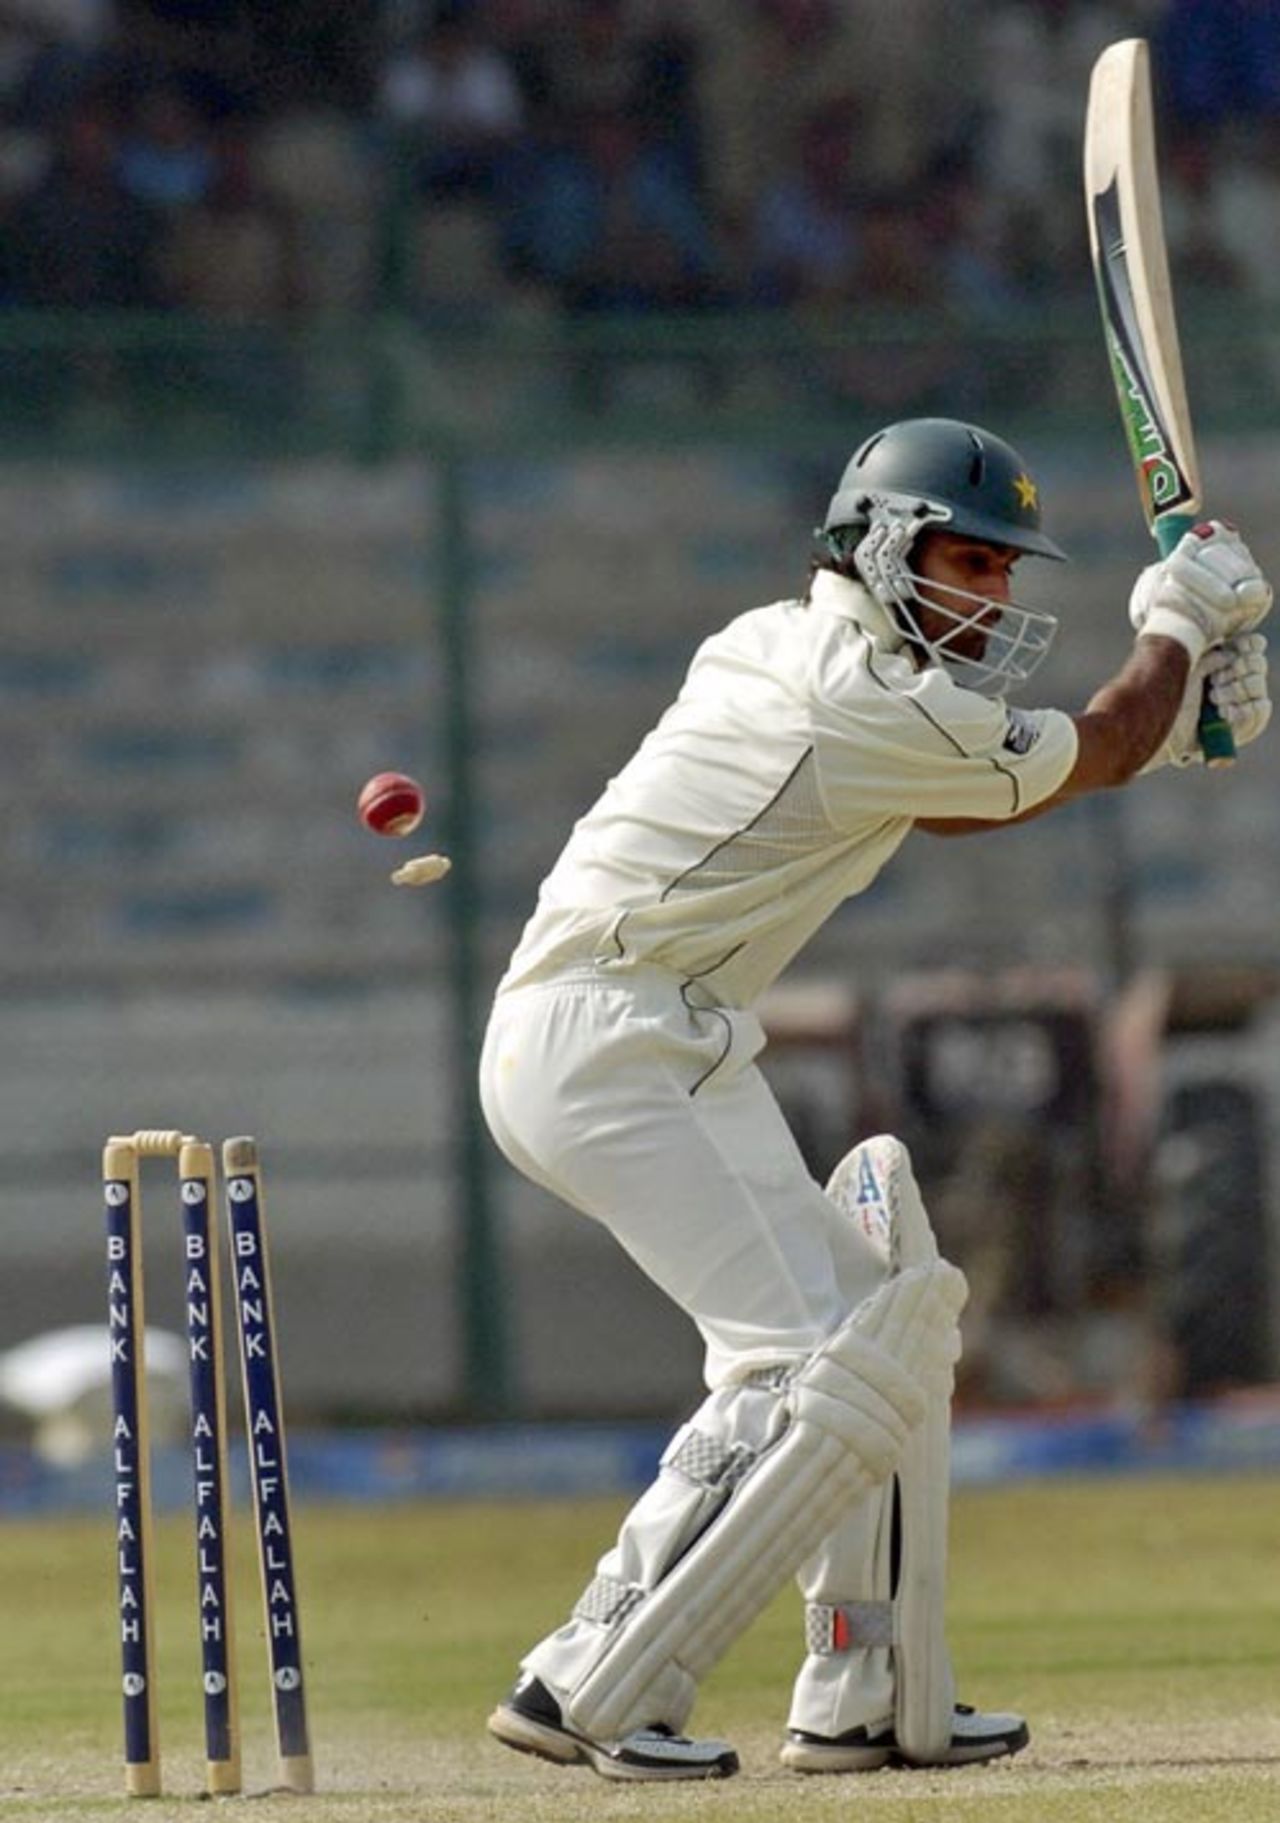 Mohammad Hafeez is bowled by Dale Steyn, Pakistan v South Africa, 1st Test, Karachi, 4th day, October 4, 2007